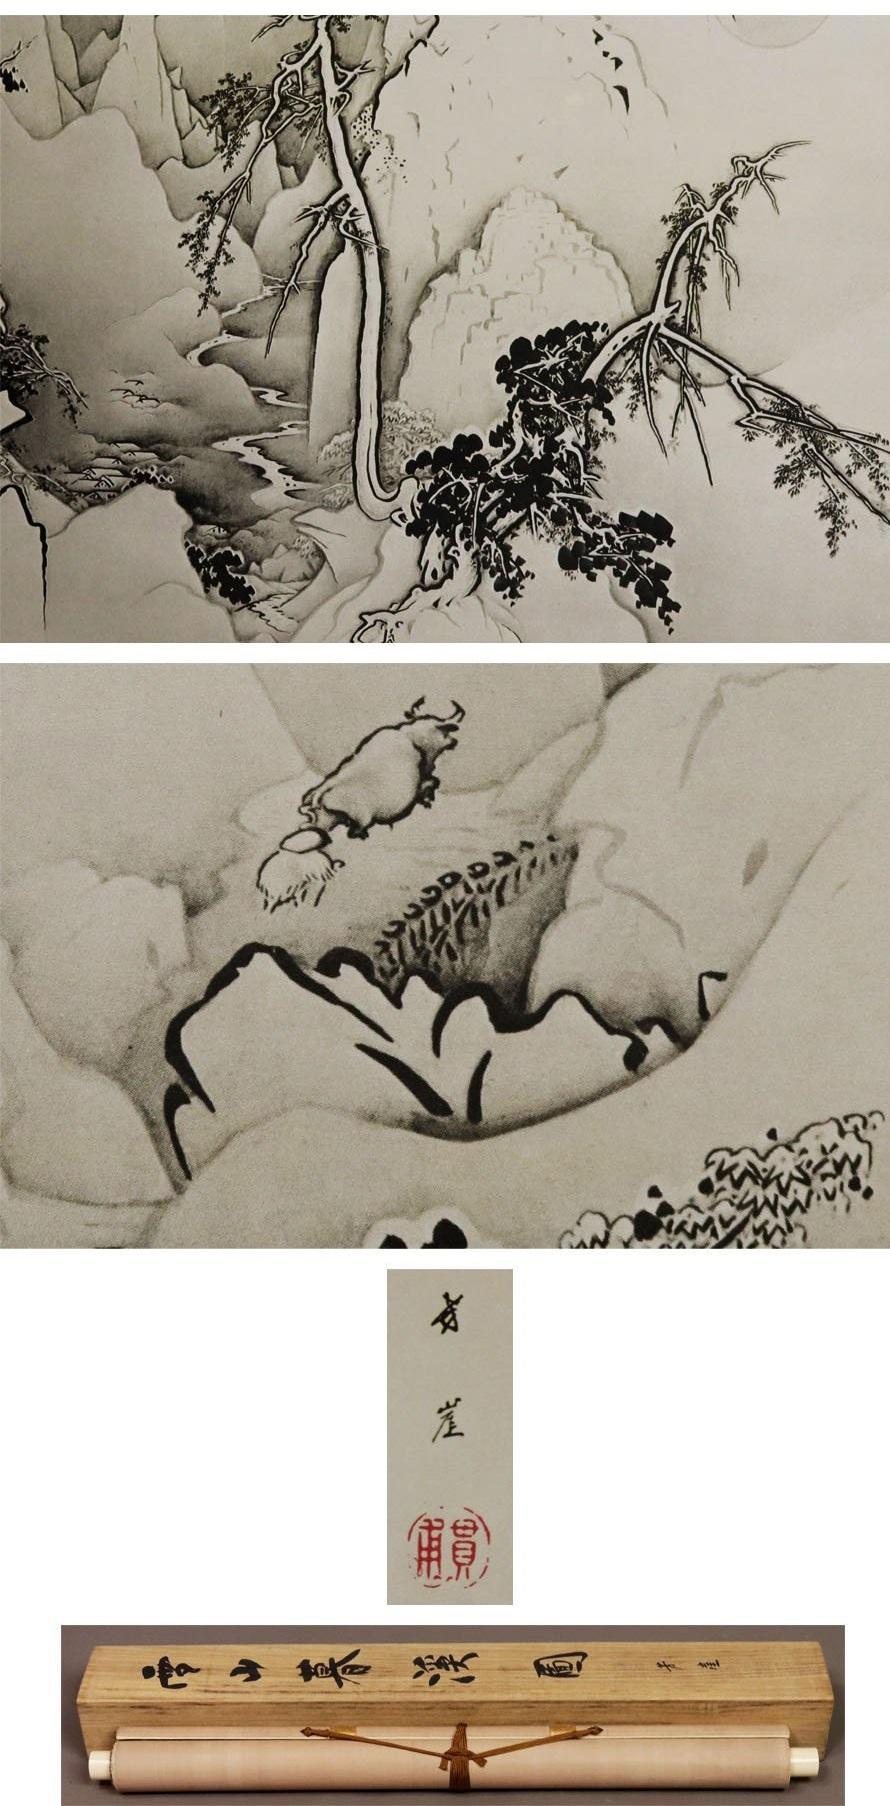  ``Snowy Mountains and Gorges'' drawn by the great master Kano Hogai . This is a wonderful work drawn using the techniques of the Kano school.

Original is
 Author:
Kano Hogai (1828-1888)
Title:
Winter landscape: a ravine
Caption:
Winter landscape: